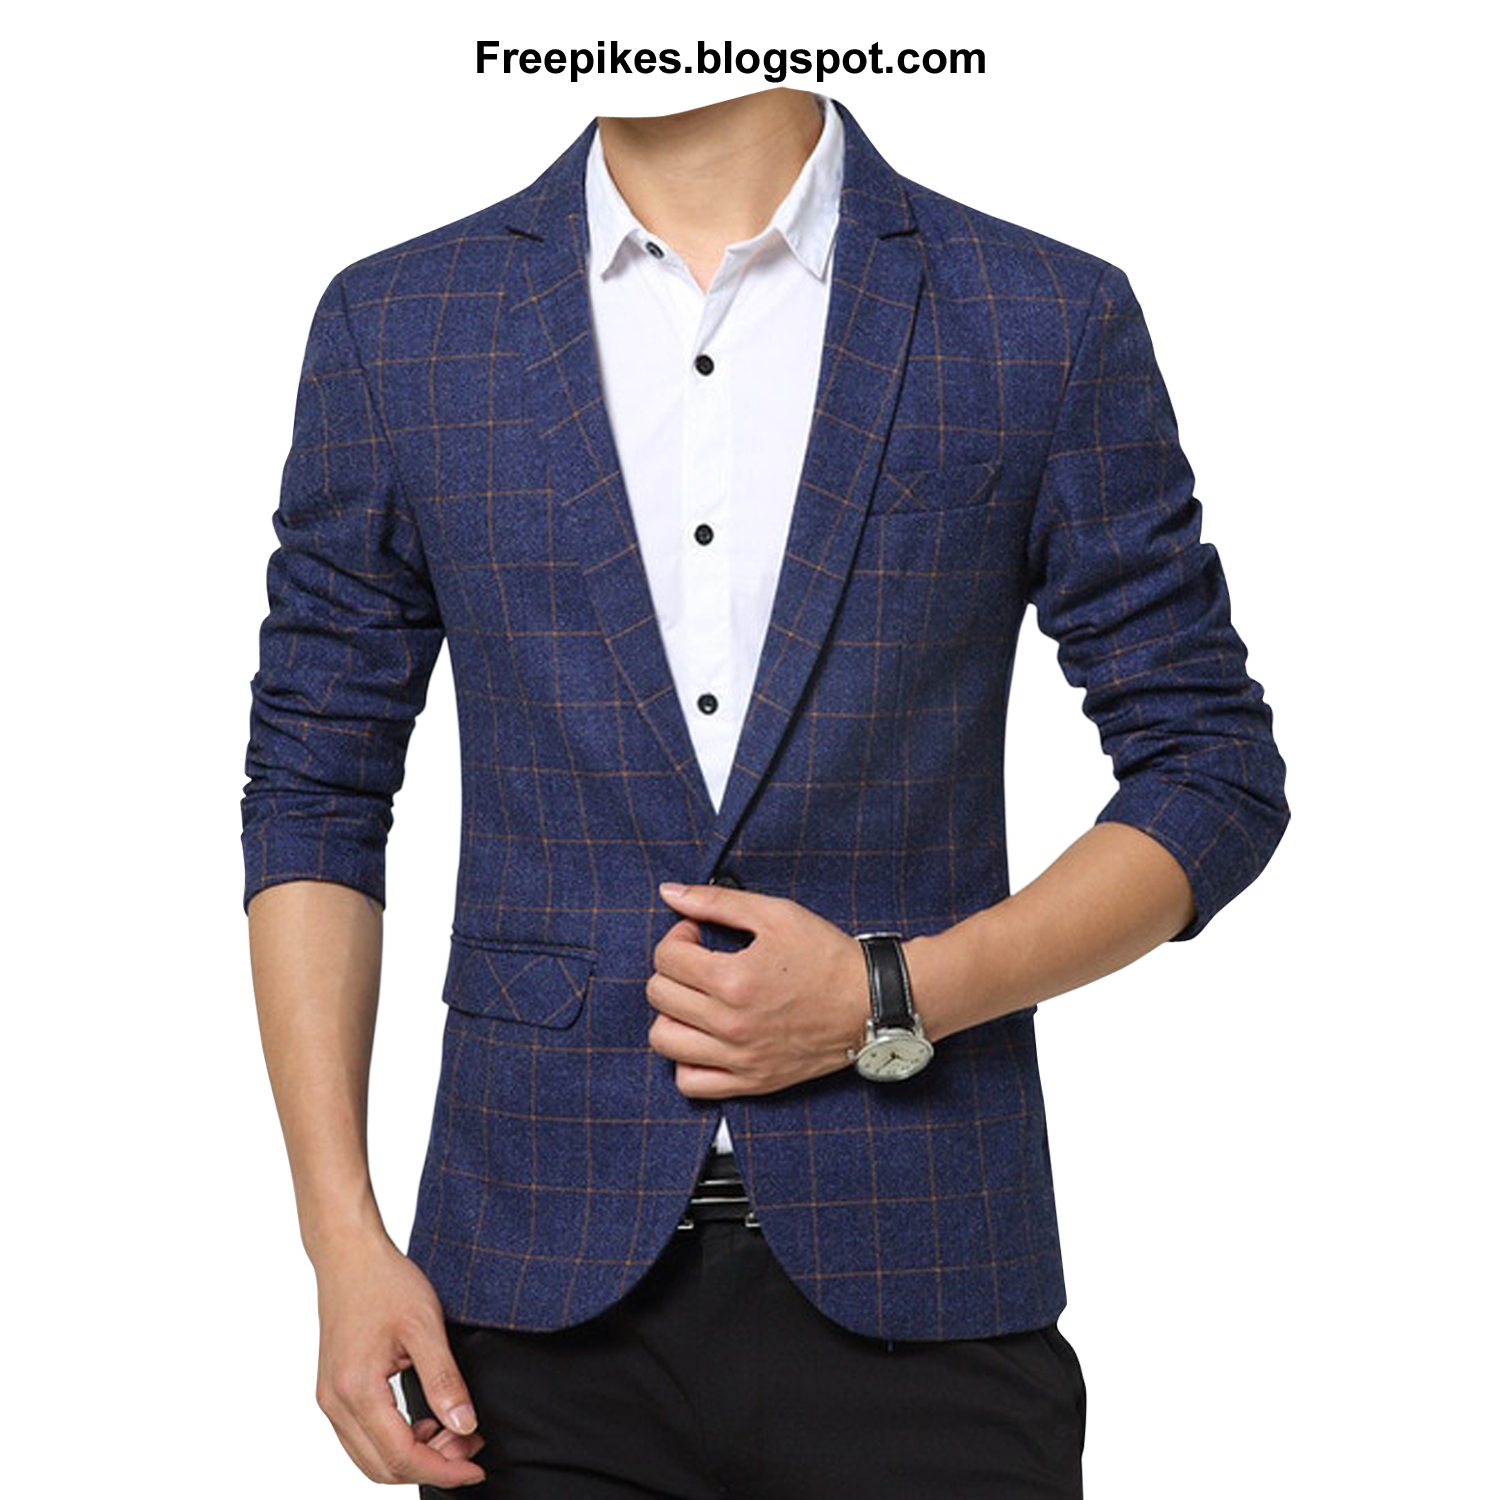 Mens Suit Dress Blazer Jackets slim in PNG for Free Download ~ FreePikes